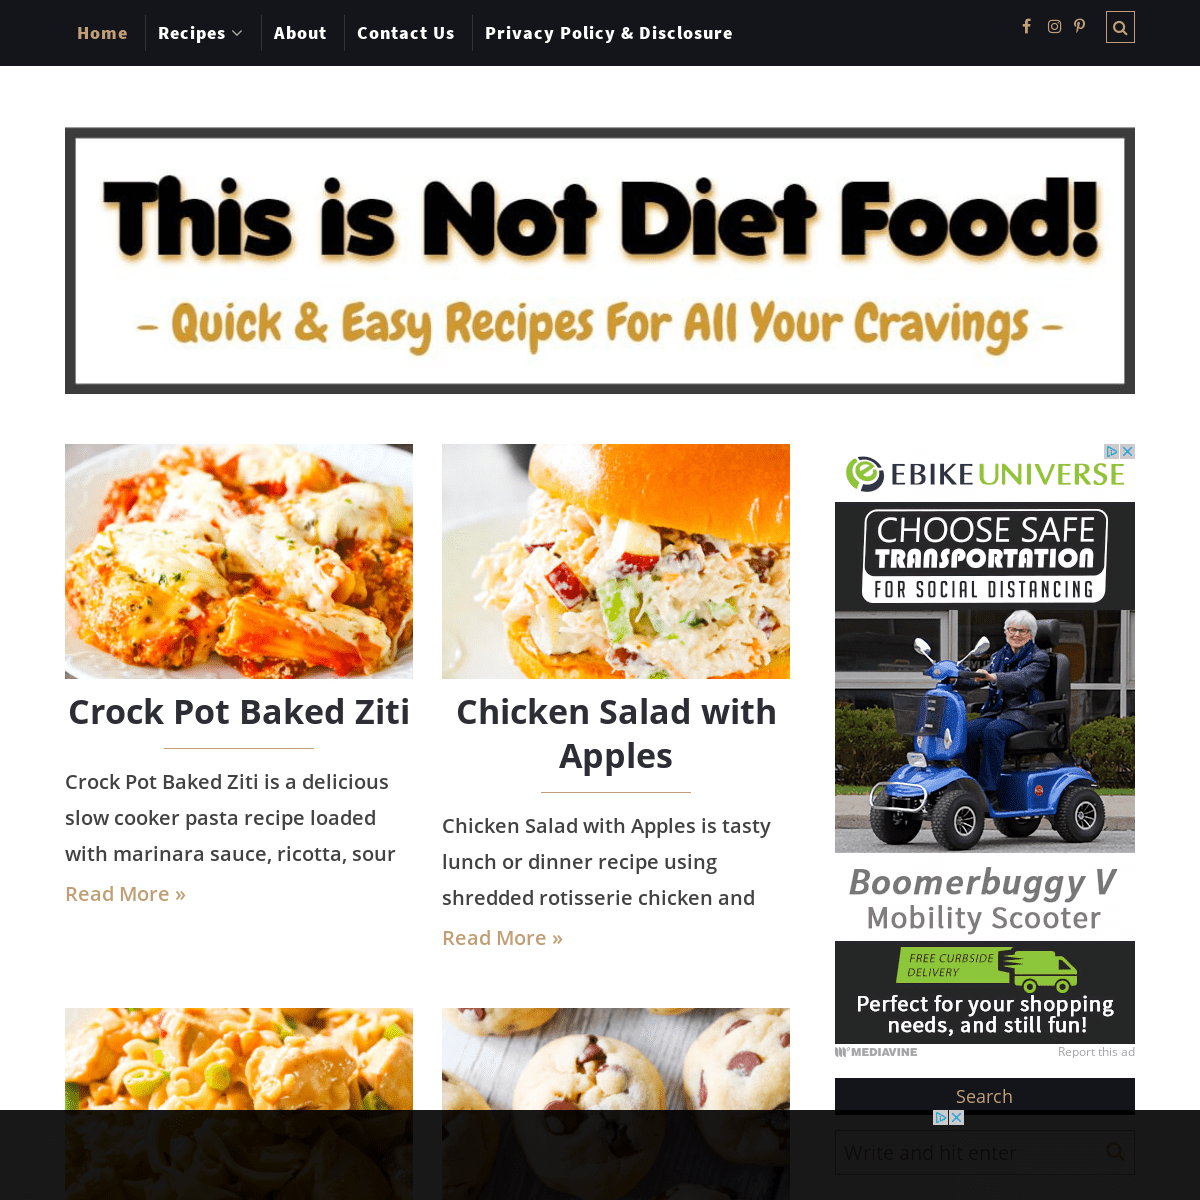 A complete backup of https://thisisnotdietfood.com